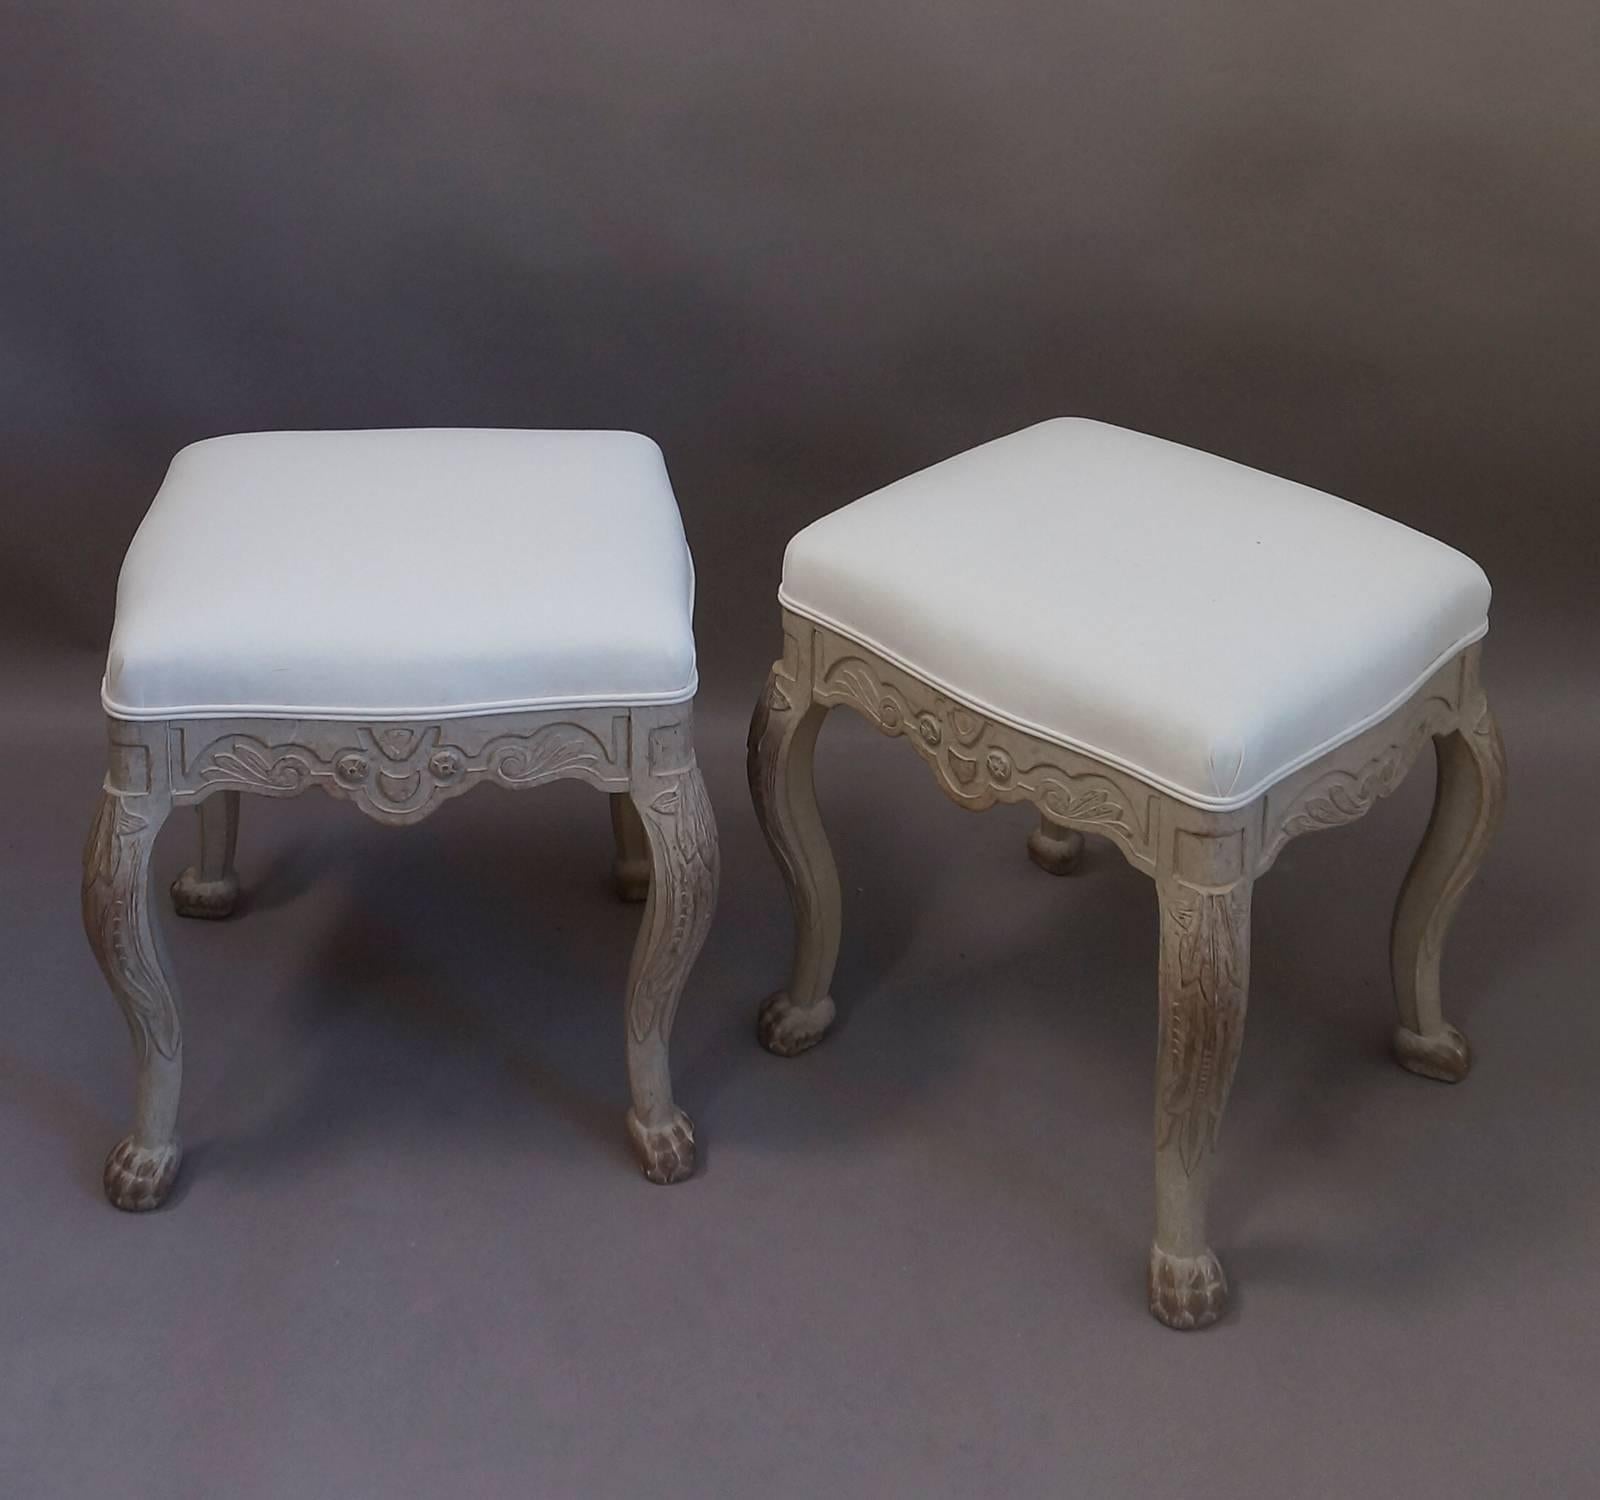 Charming pair of Rococo-style stools, Sweden, circa 1900, with carved aprons, cabriole legs with carved foliage, and lion’s paw feet, complete with claws. Upholstered seats.